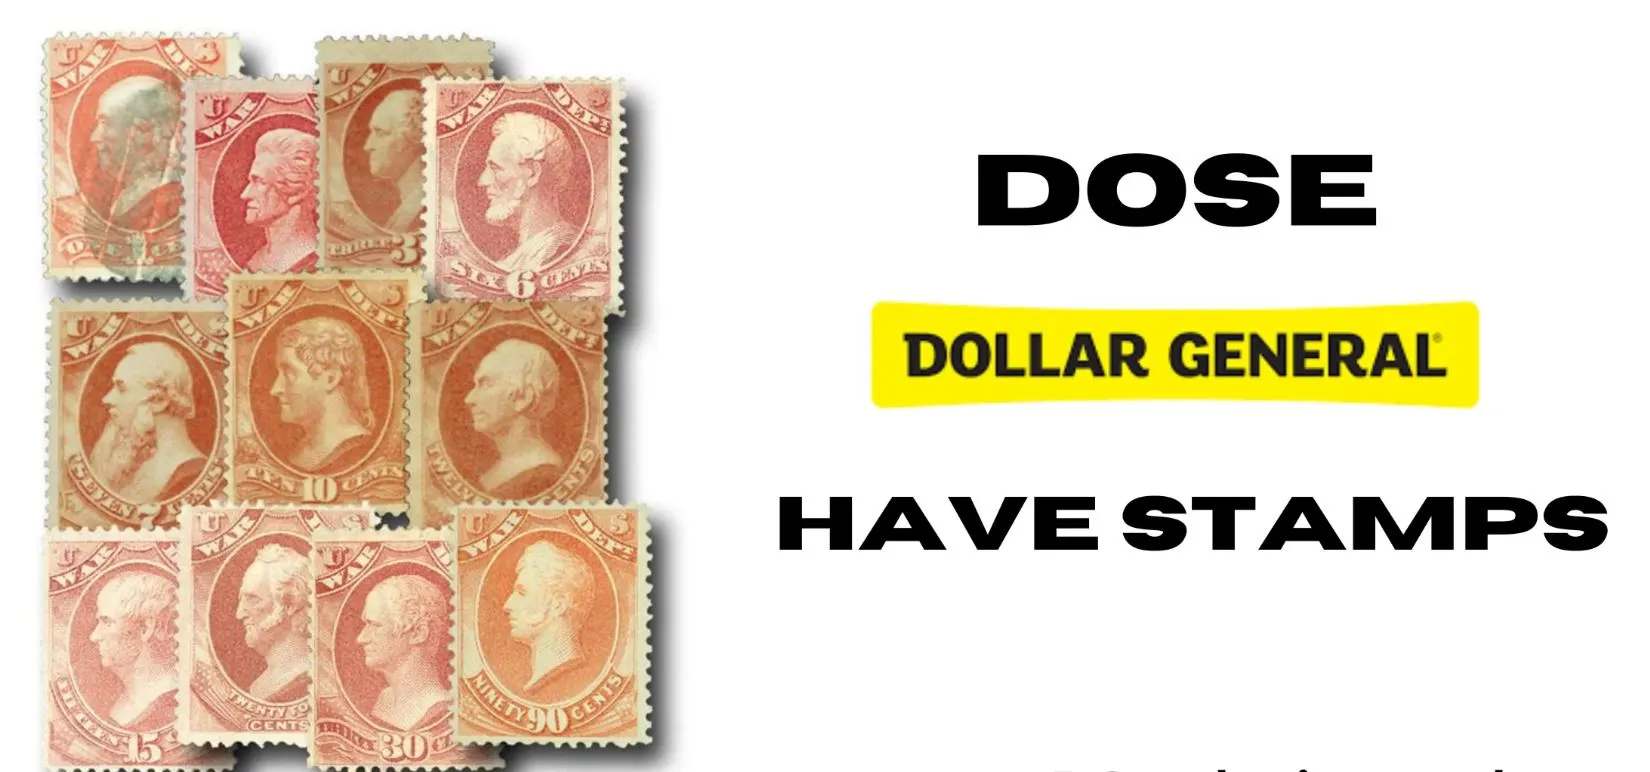 Does-dollar-general-have-stamps